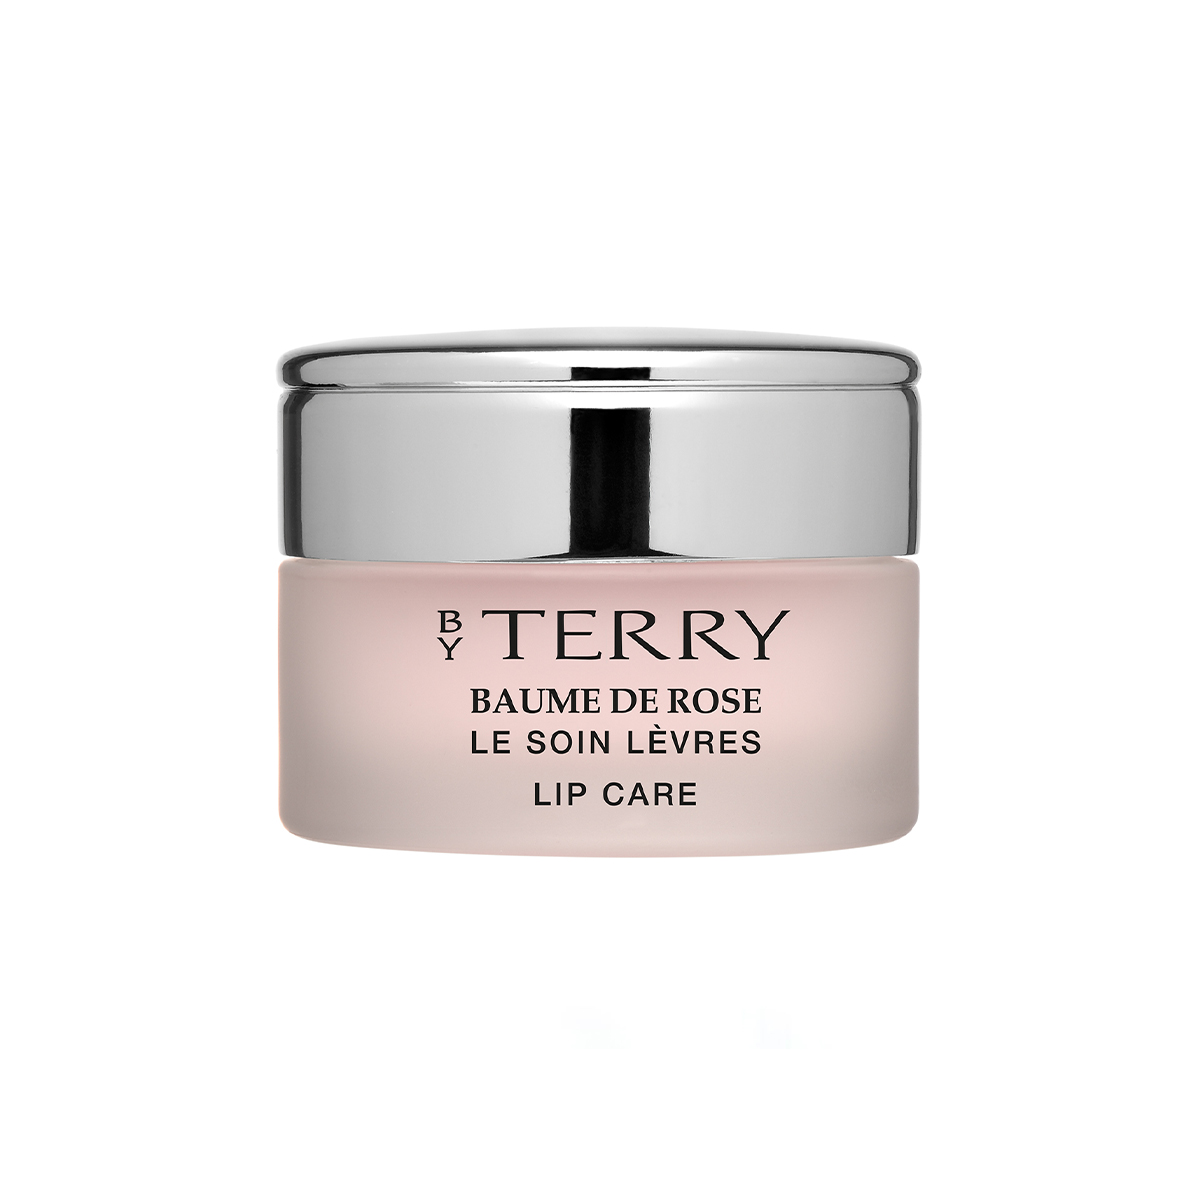 by Terry Baume de Rose Lip Care